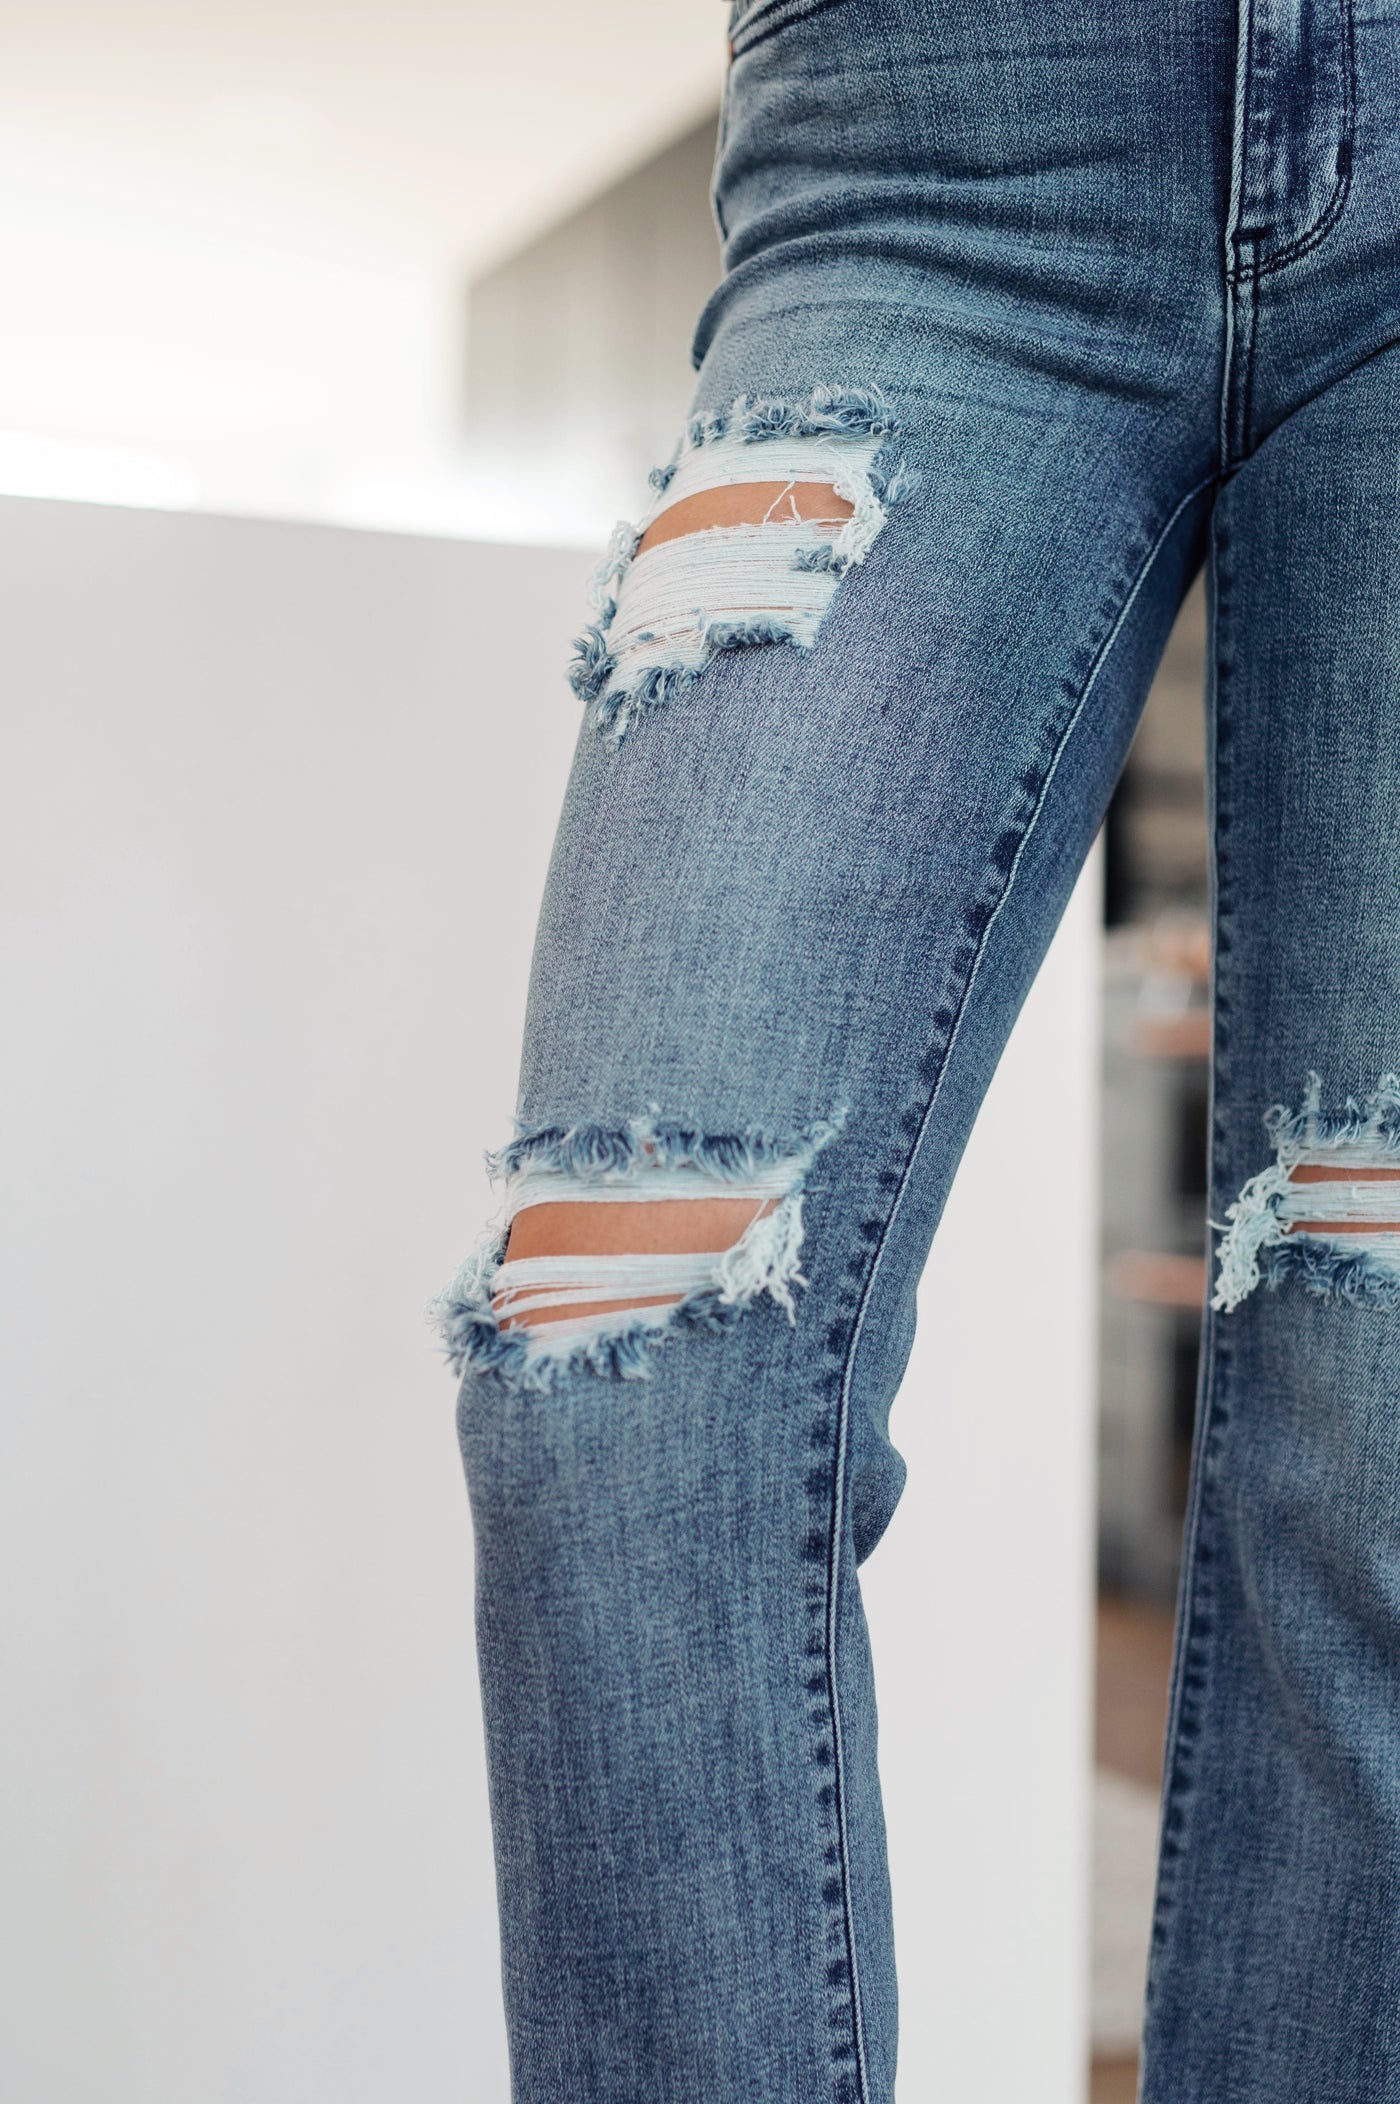 The O'Hara Destroyed Straight Jeans have the perfect balance of style, versatility, and timelessness